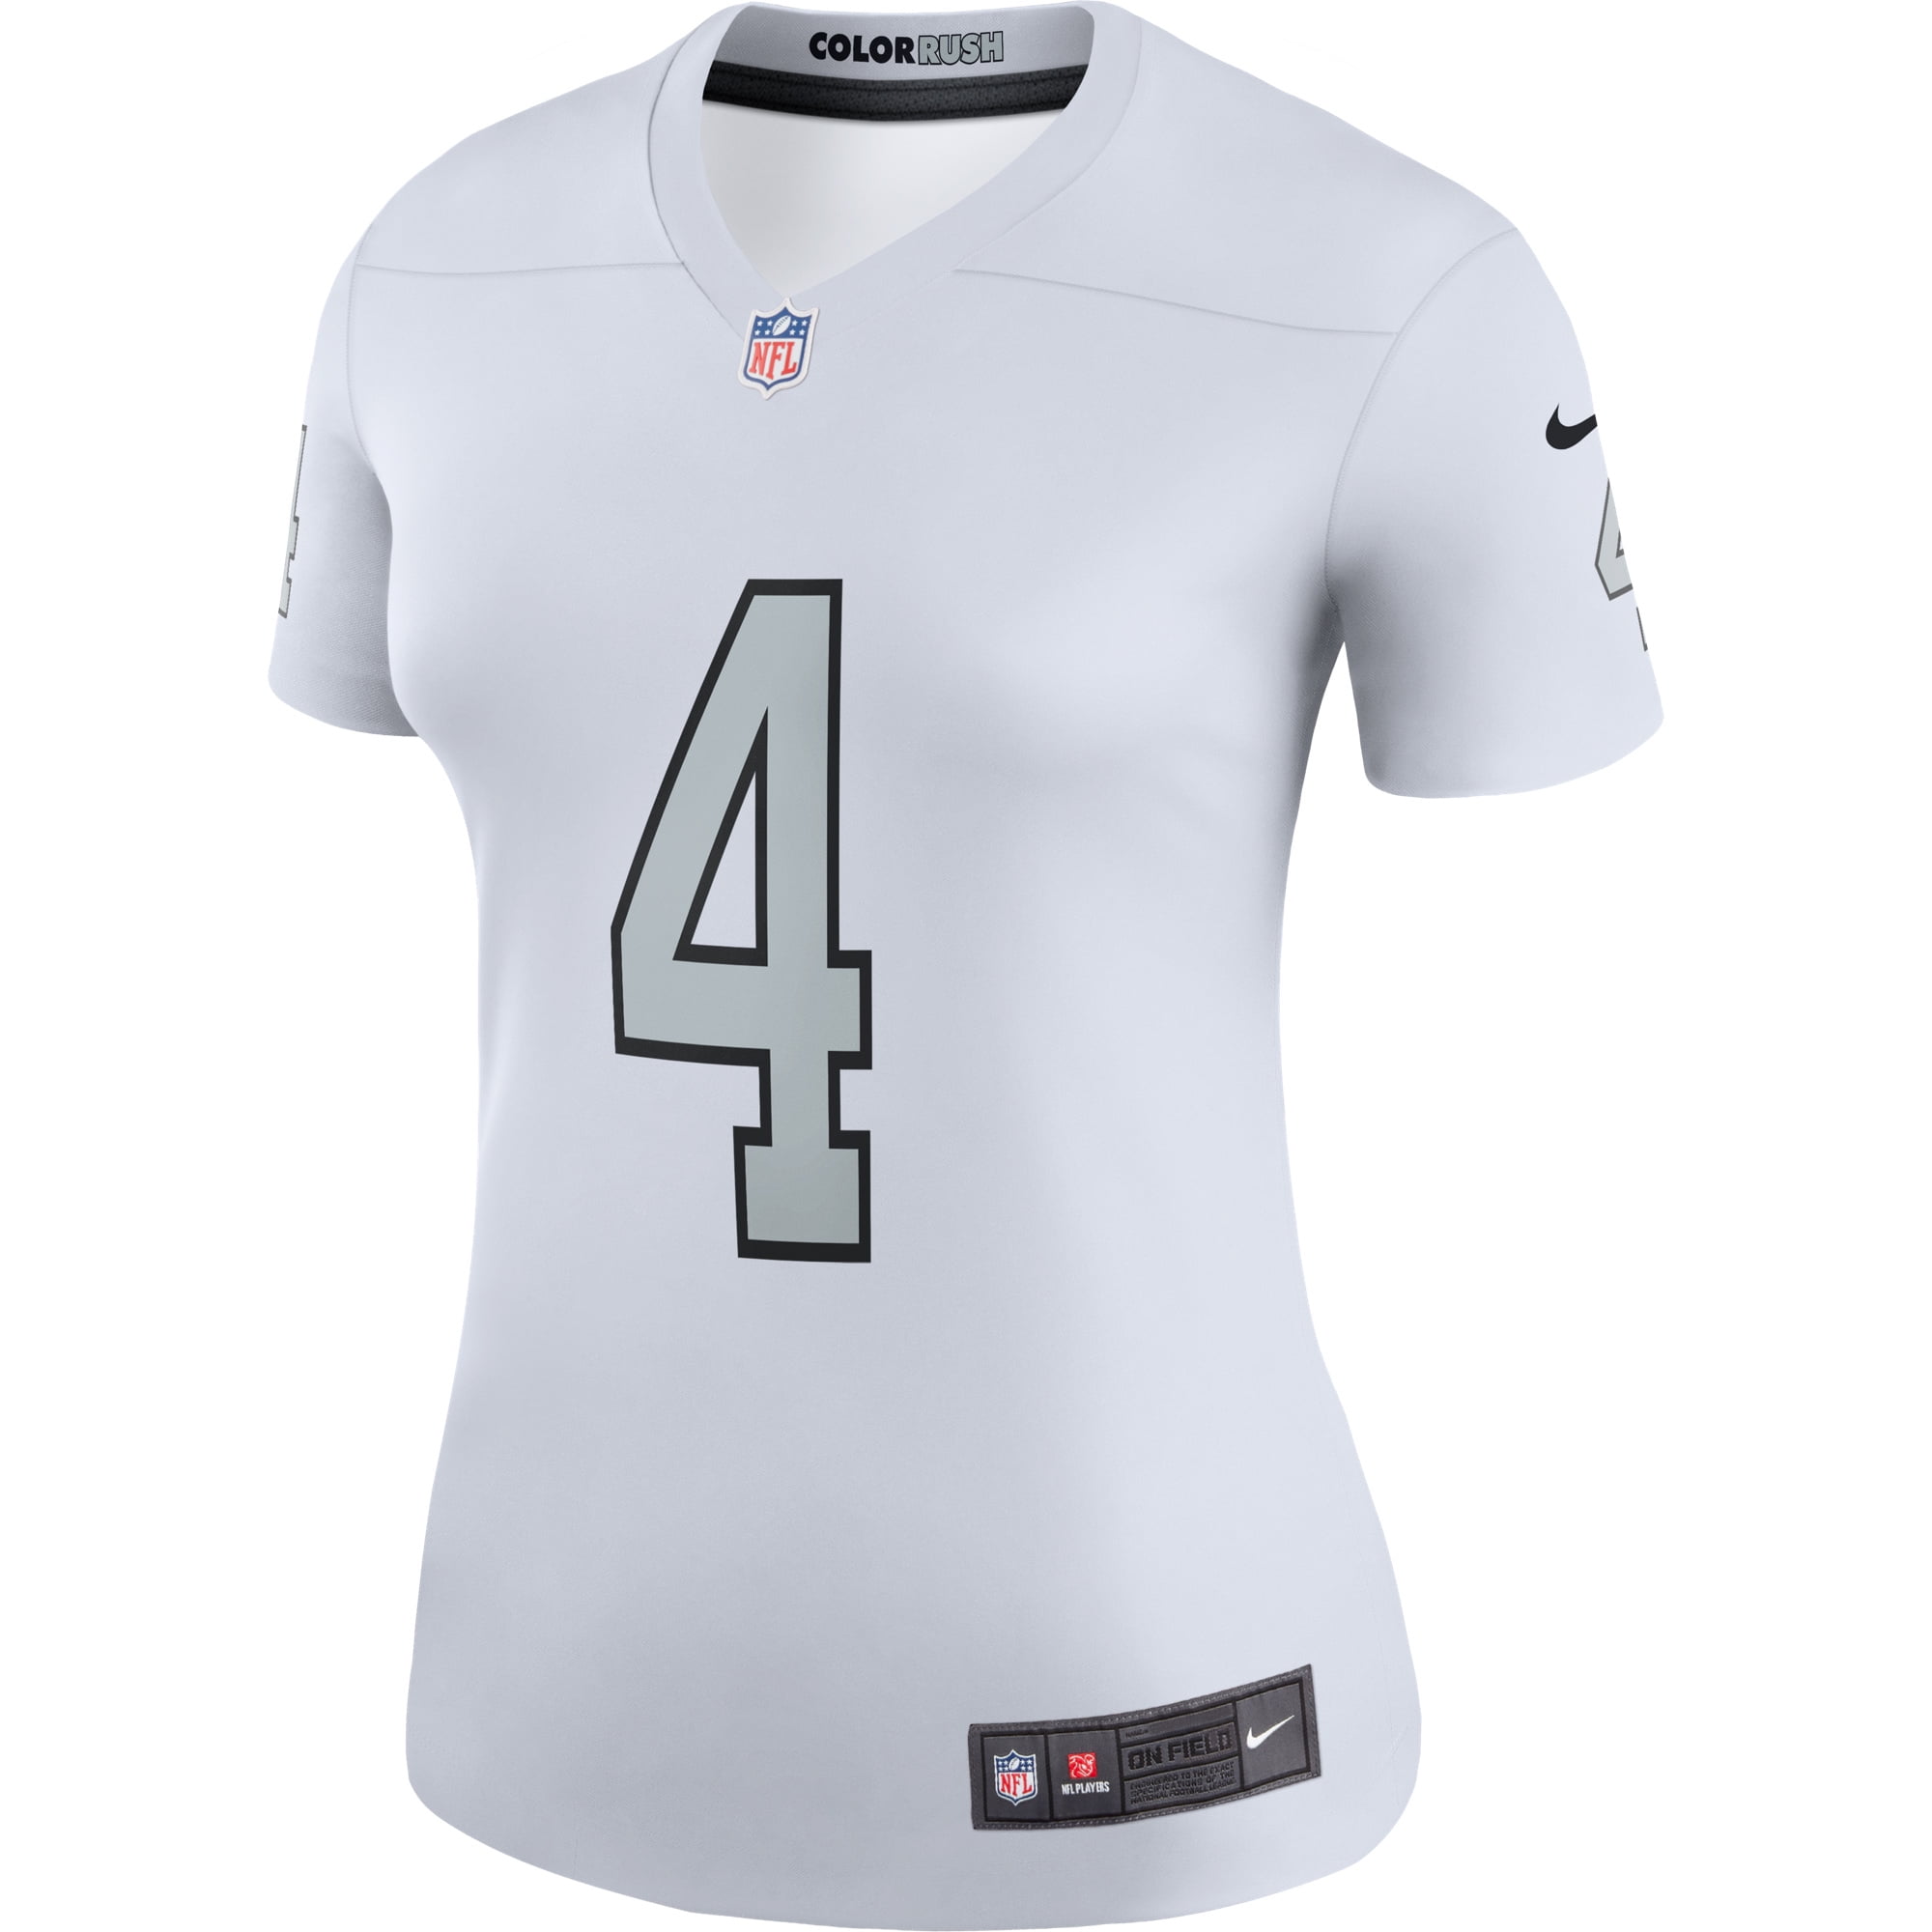 raiders color rush jersey for sale